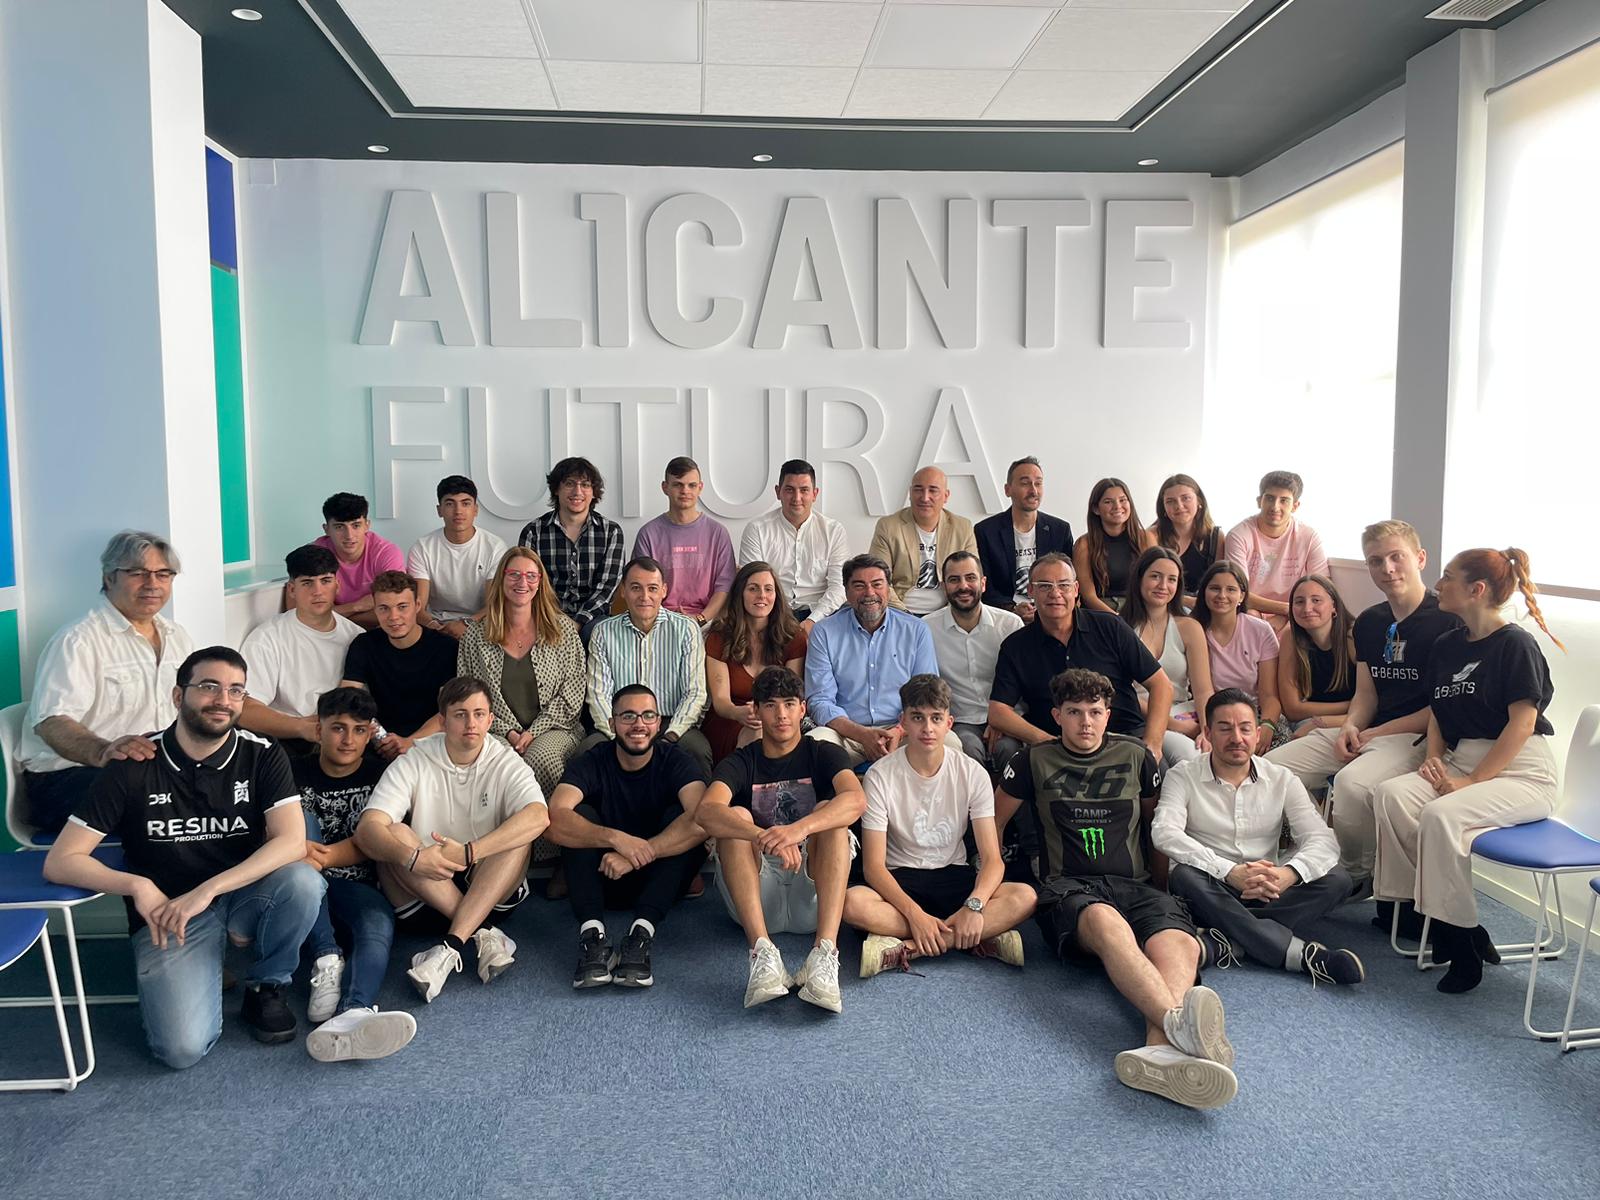 Alicante brings together the gamer community at a meeting between companies, experts and gamers